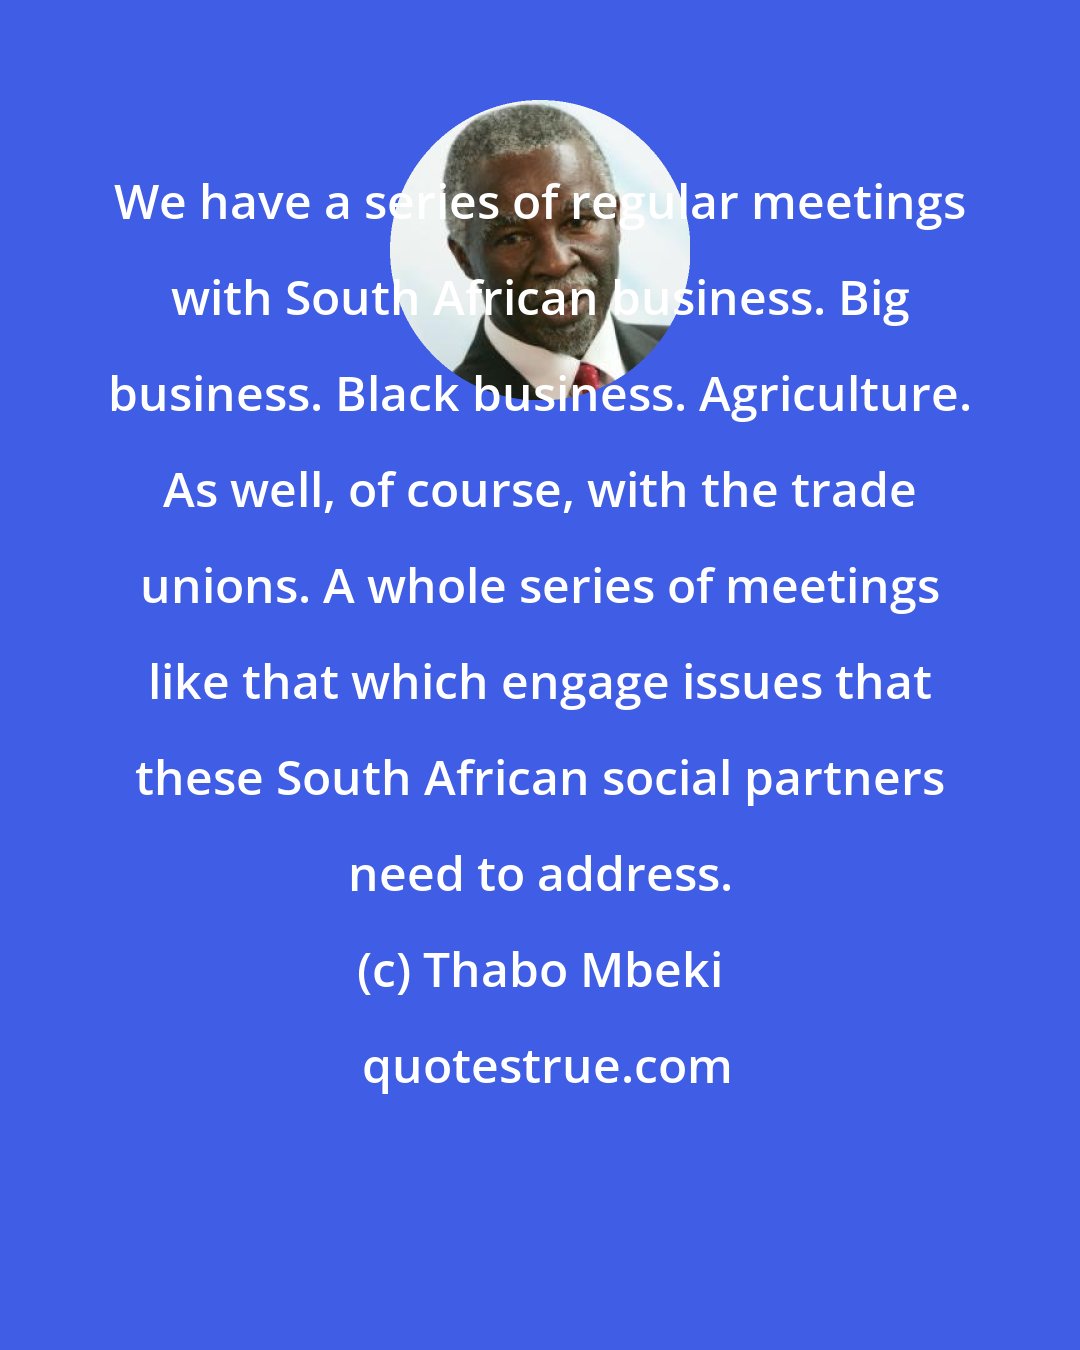 Thabo Mbeki: We have a series of regular meetings with South African business. Big business. Black business. Agriculture. As well, of course, with the trade unions. A whole series of meetings like that which engage issues that these South African social partners need to address.